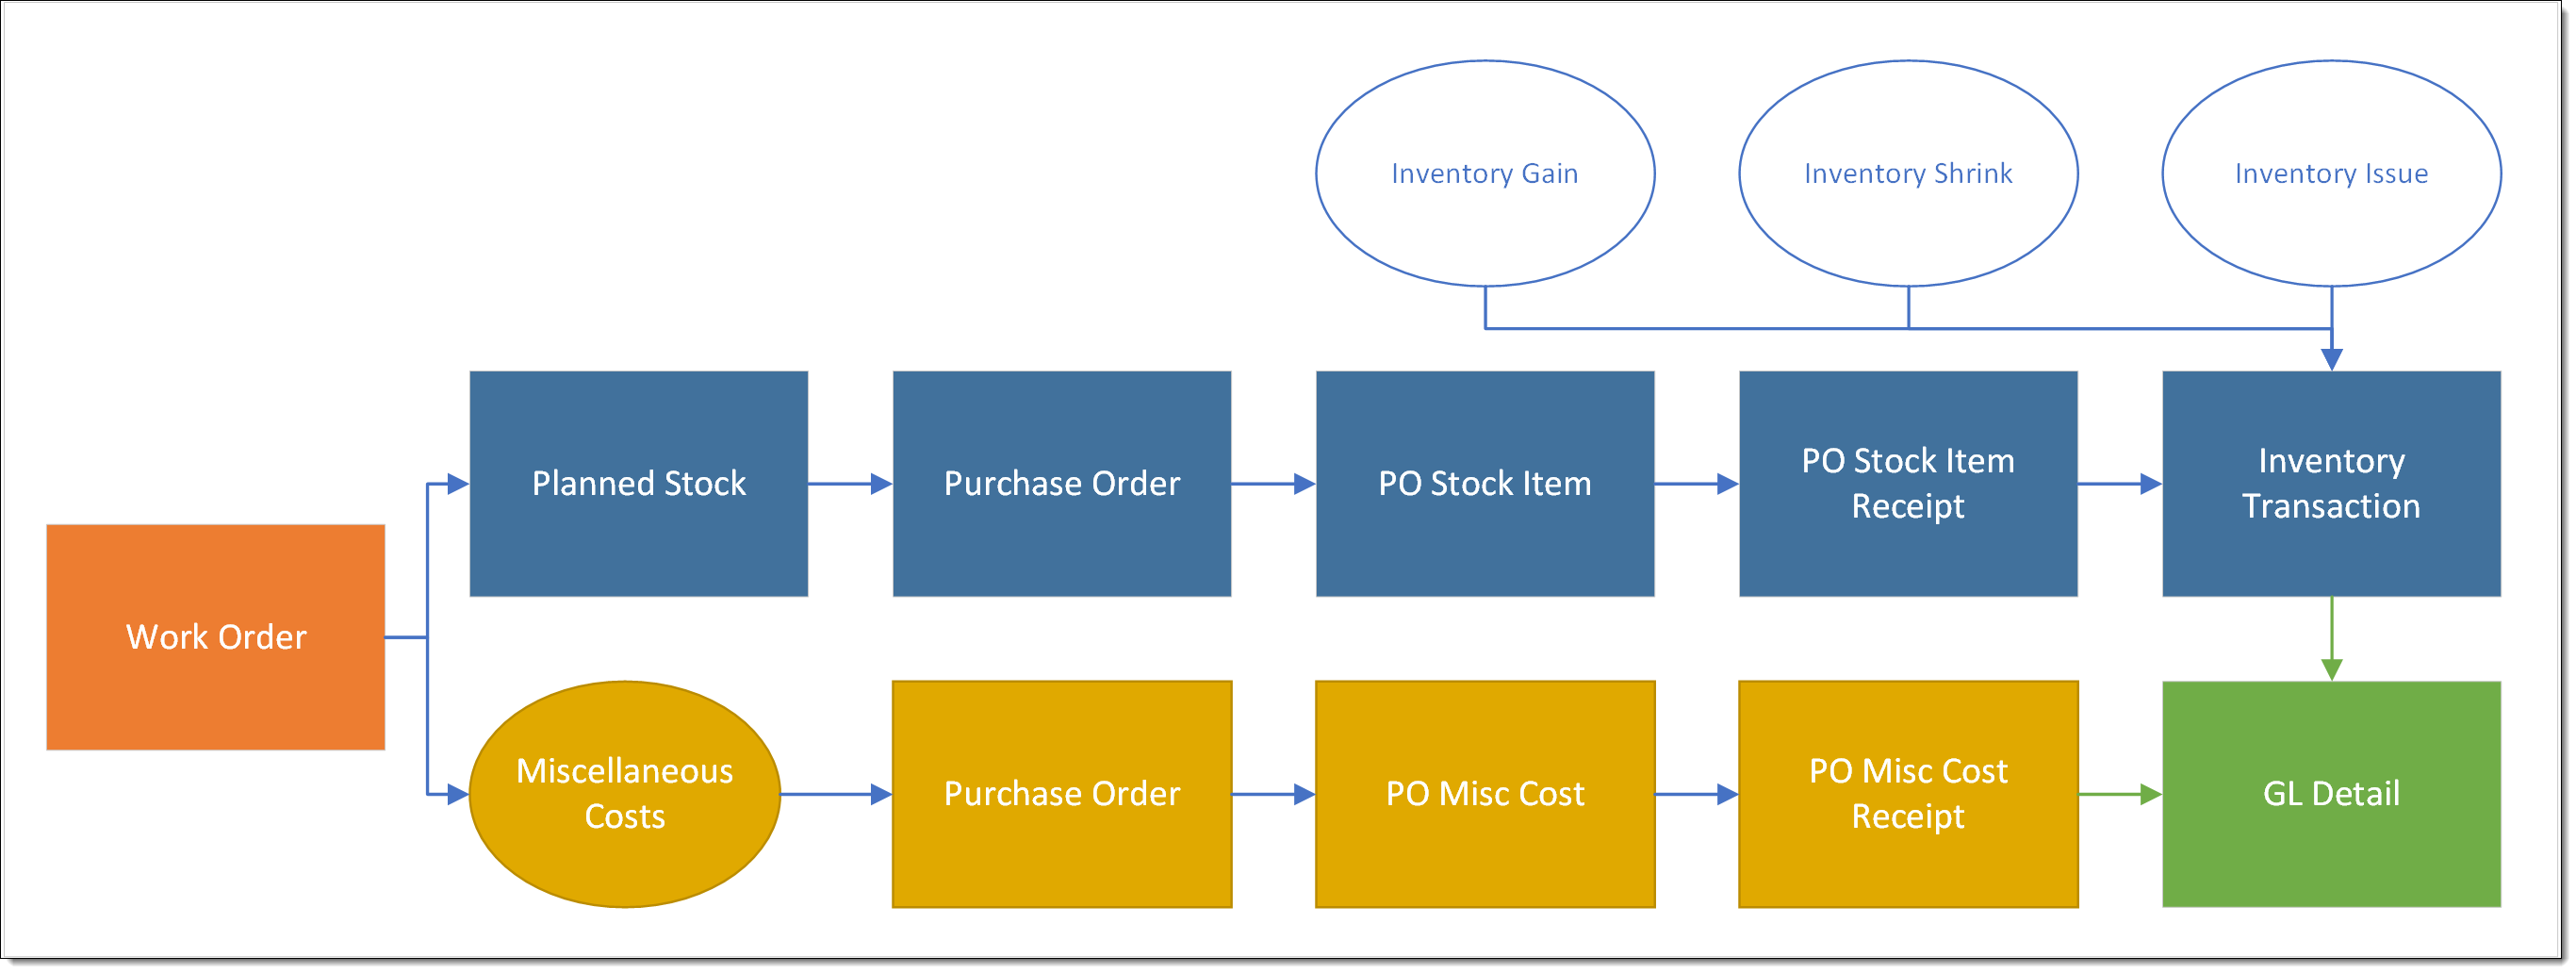 Flowchart showing the relationship of Purchase Order objects